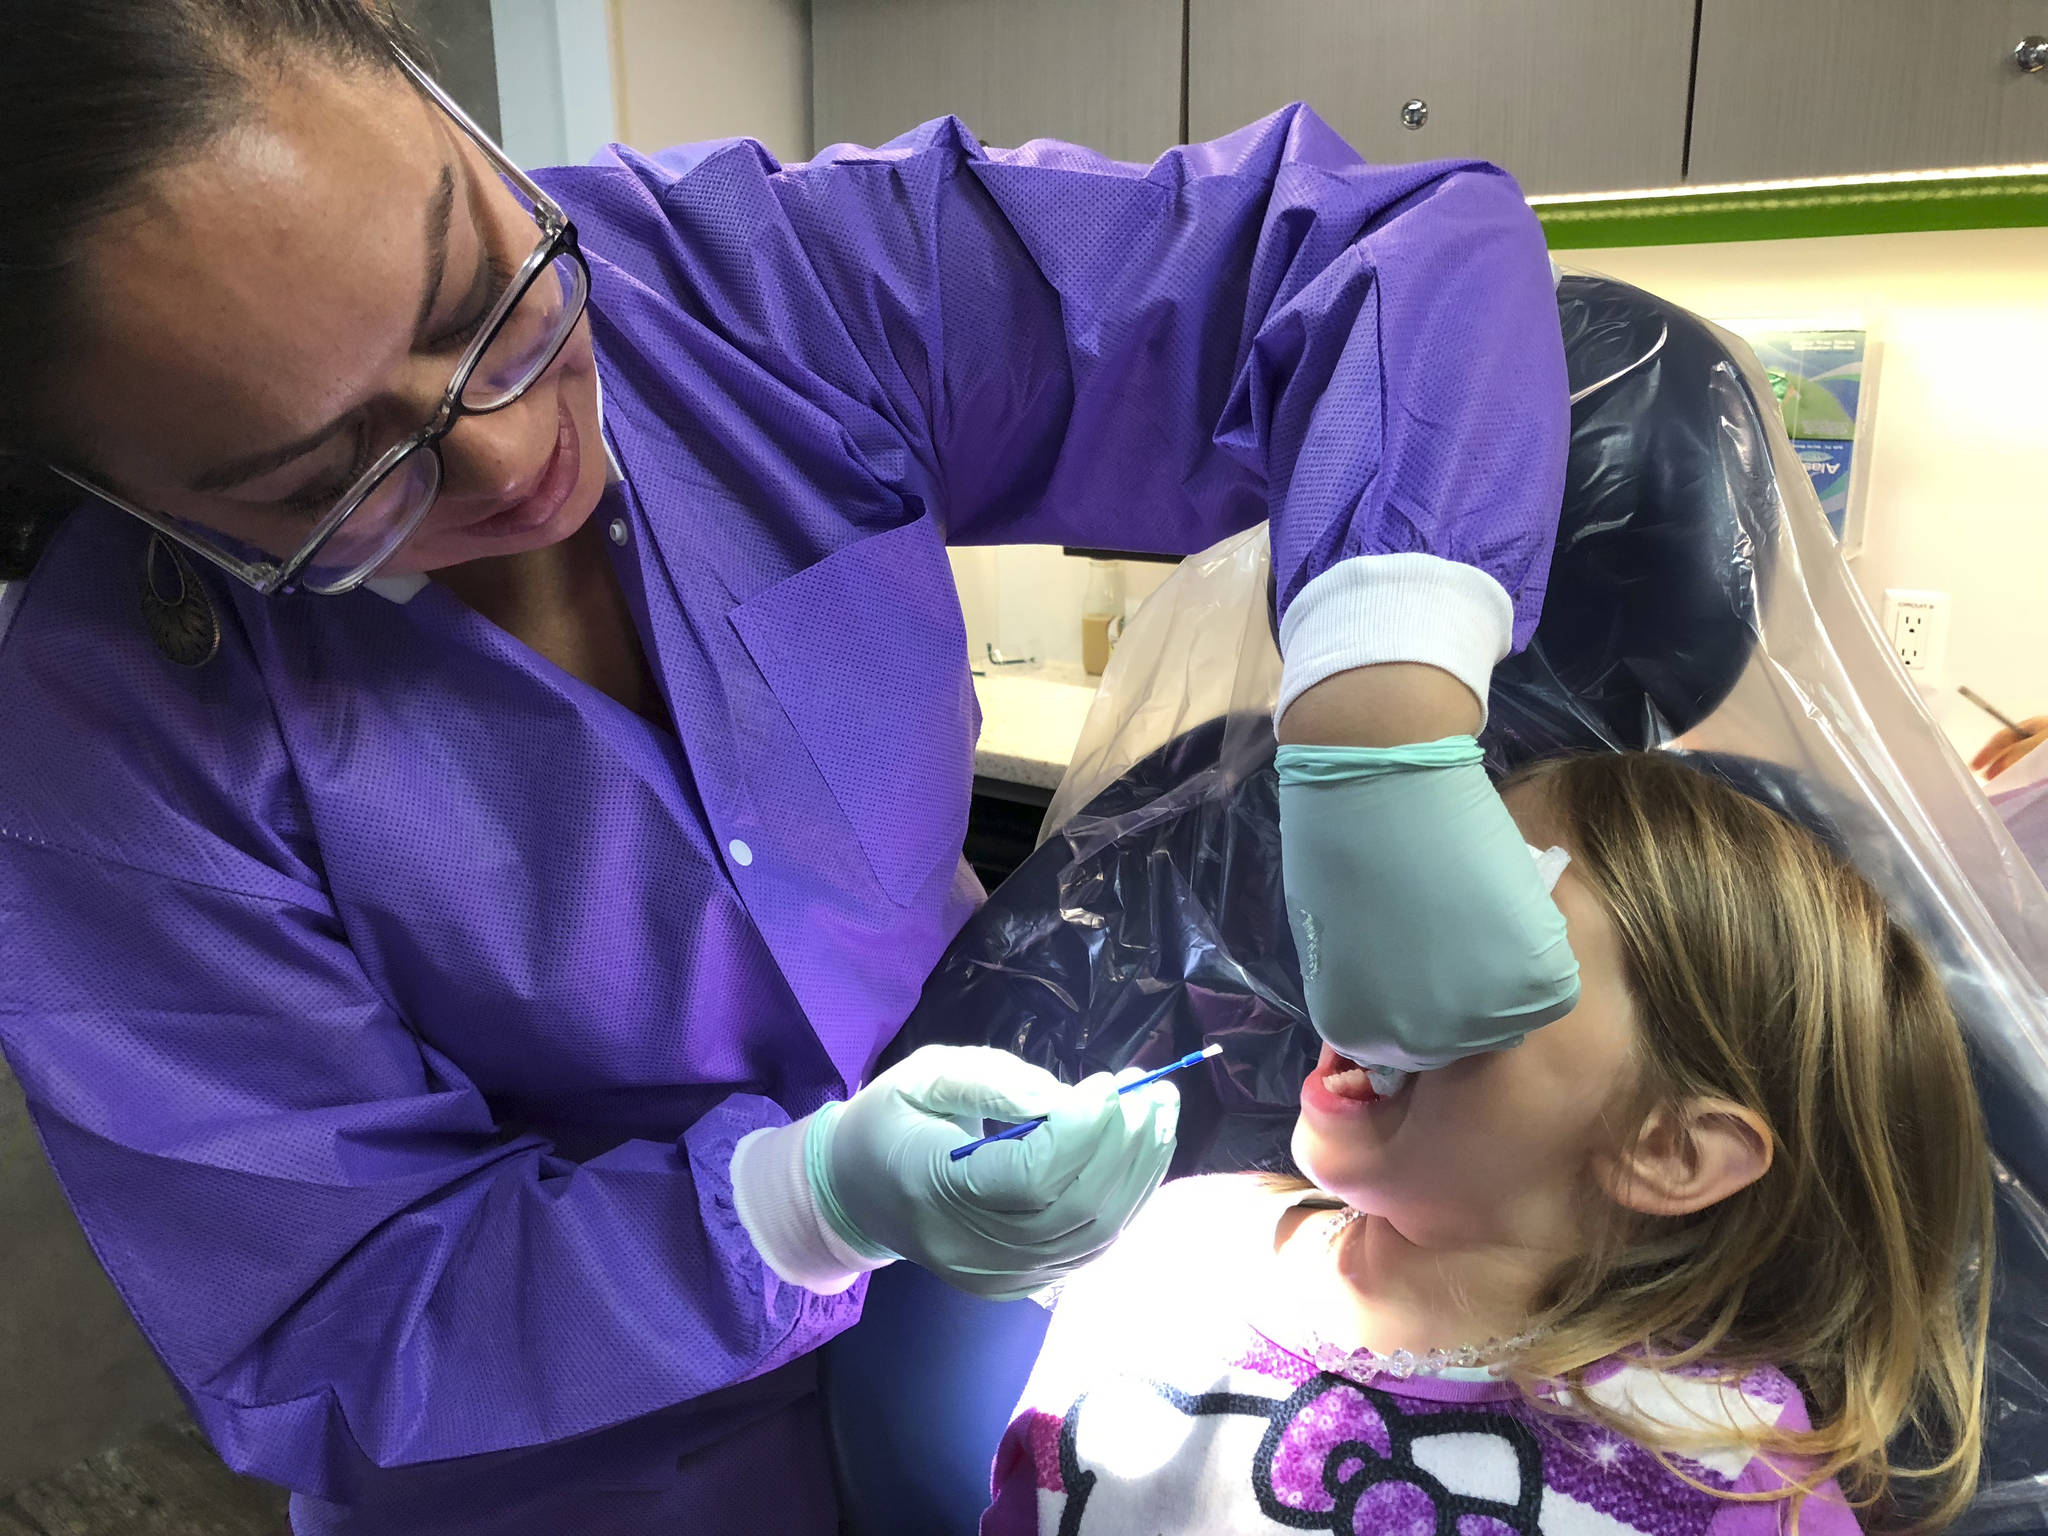 Dr. Jennifer Domagalski, DMD and the dental team will provide examinations to children, youth, young adults and pregnant/postpartum people with Apple Health coverage. Submitted Photos